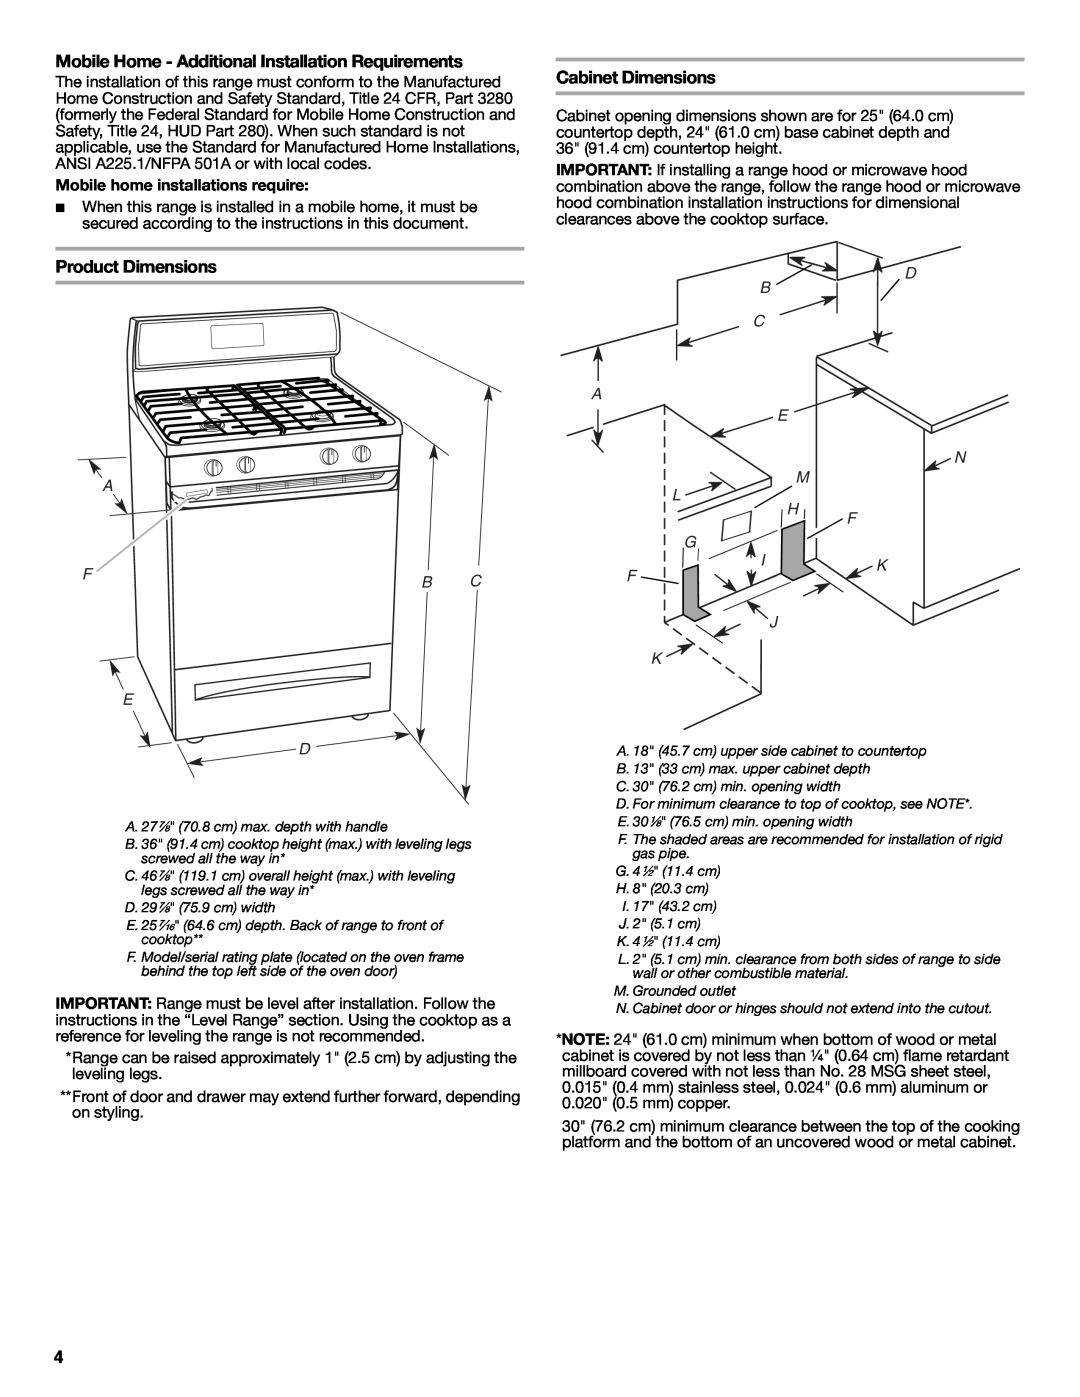 Whirlpool W10526974A Mobile Home - Additional Installation Requirements, Cabinet Dimensions, Product Dimensions, A L G F K 